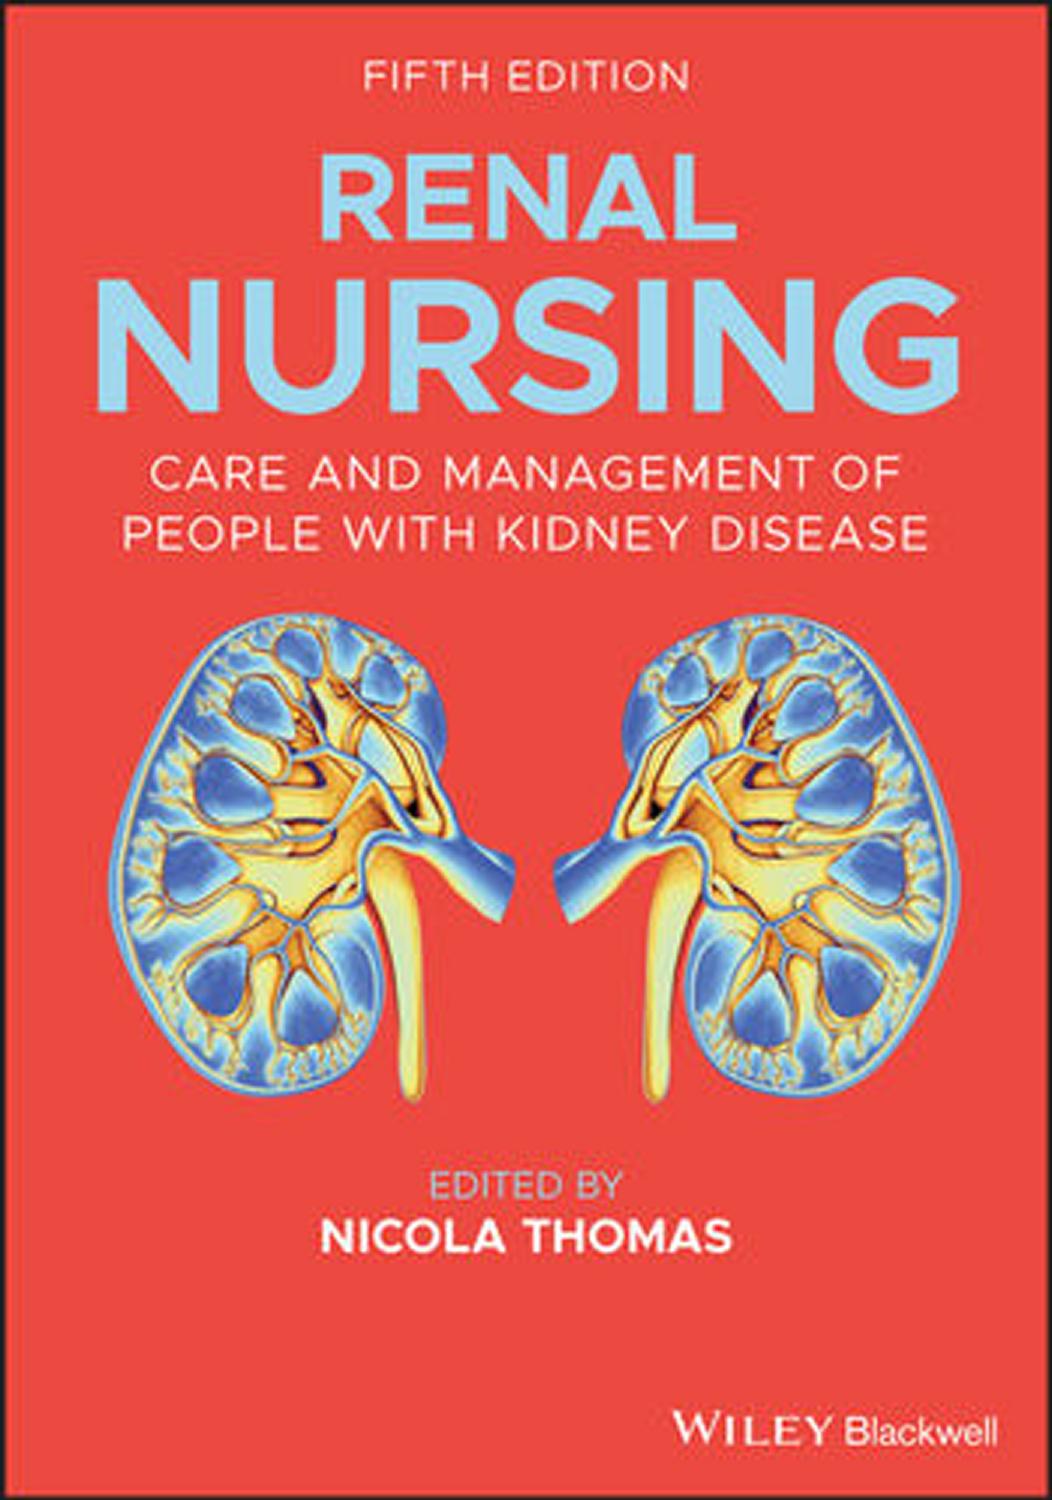 Renal Nursing: Care and Management of People with Kidney Disease, 5th Edition